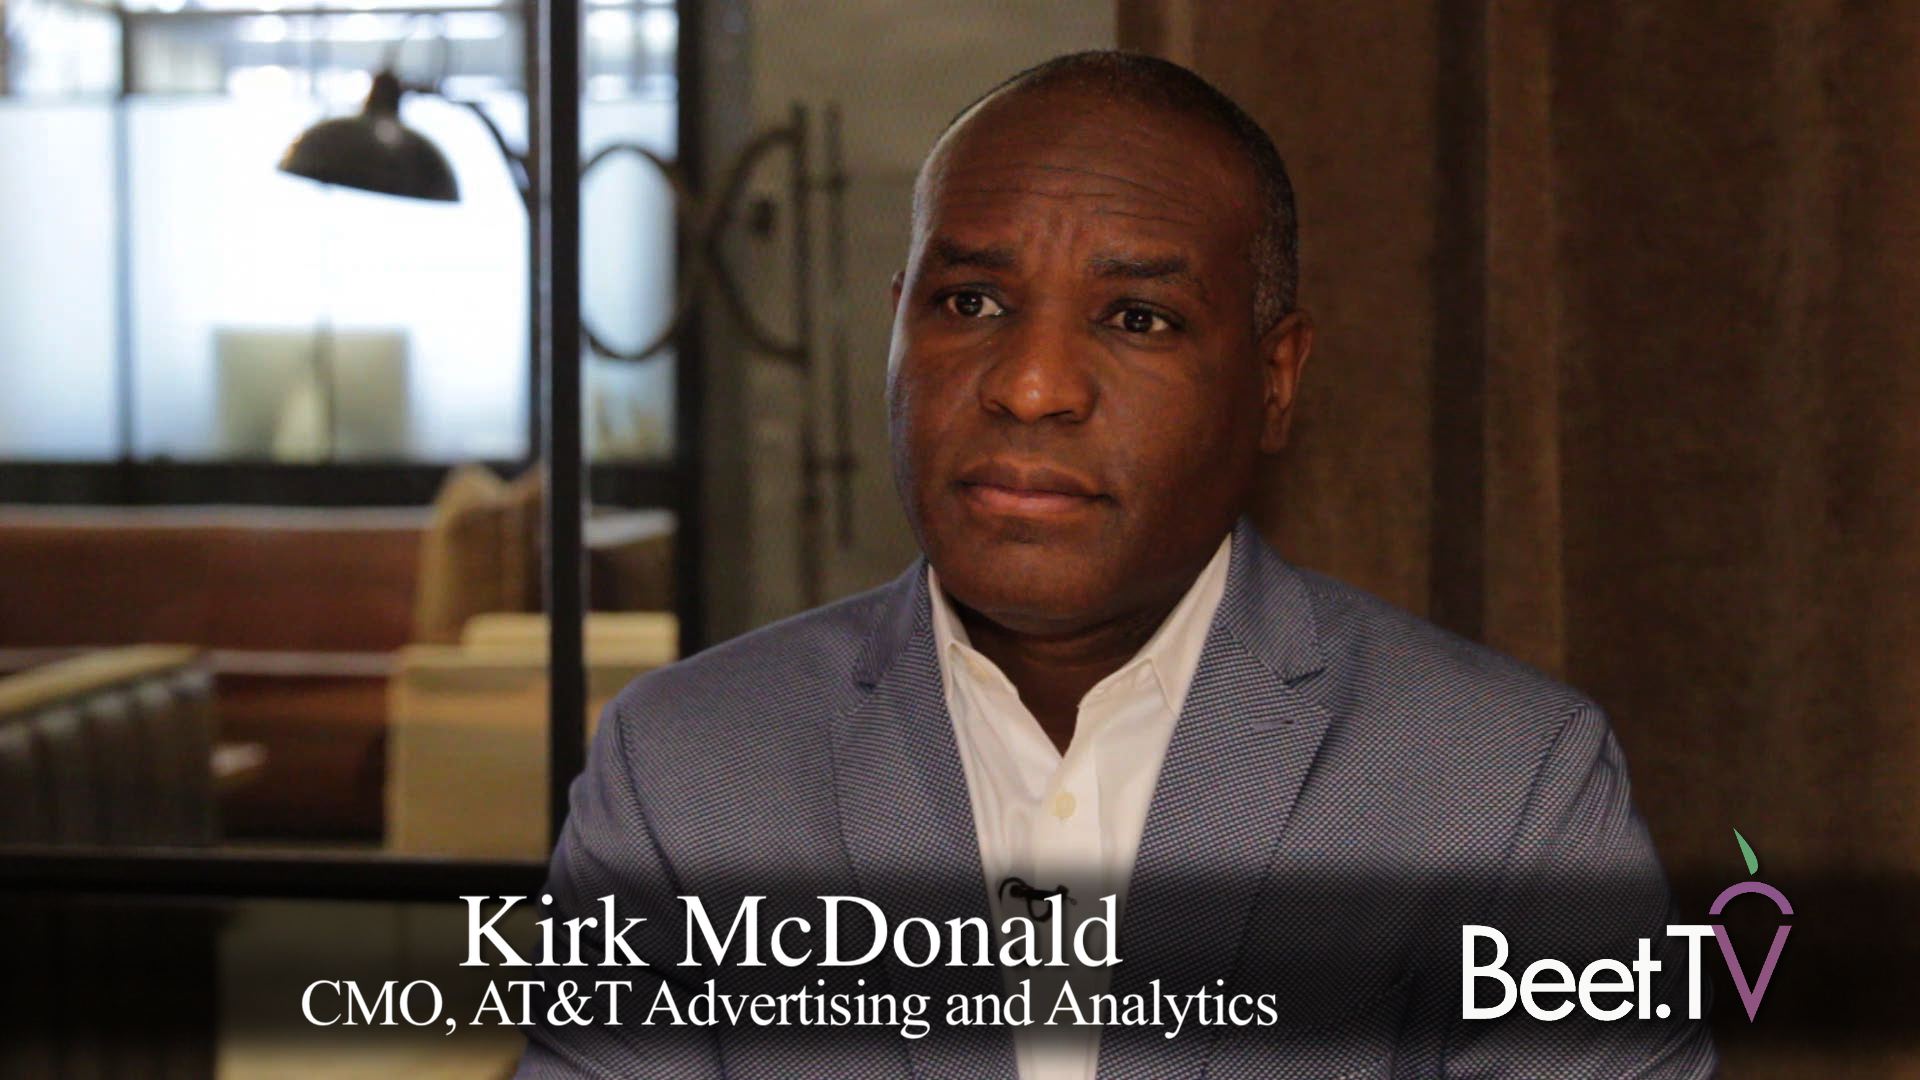 AT&T’s Ad Group Spotlights The “Attention Economy” as it Prepares September Launch